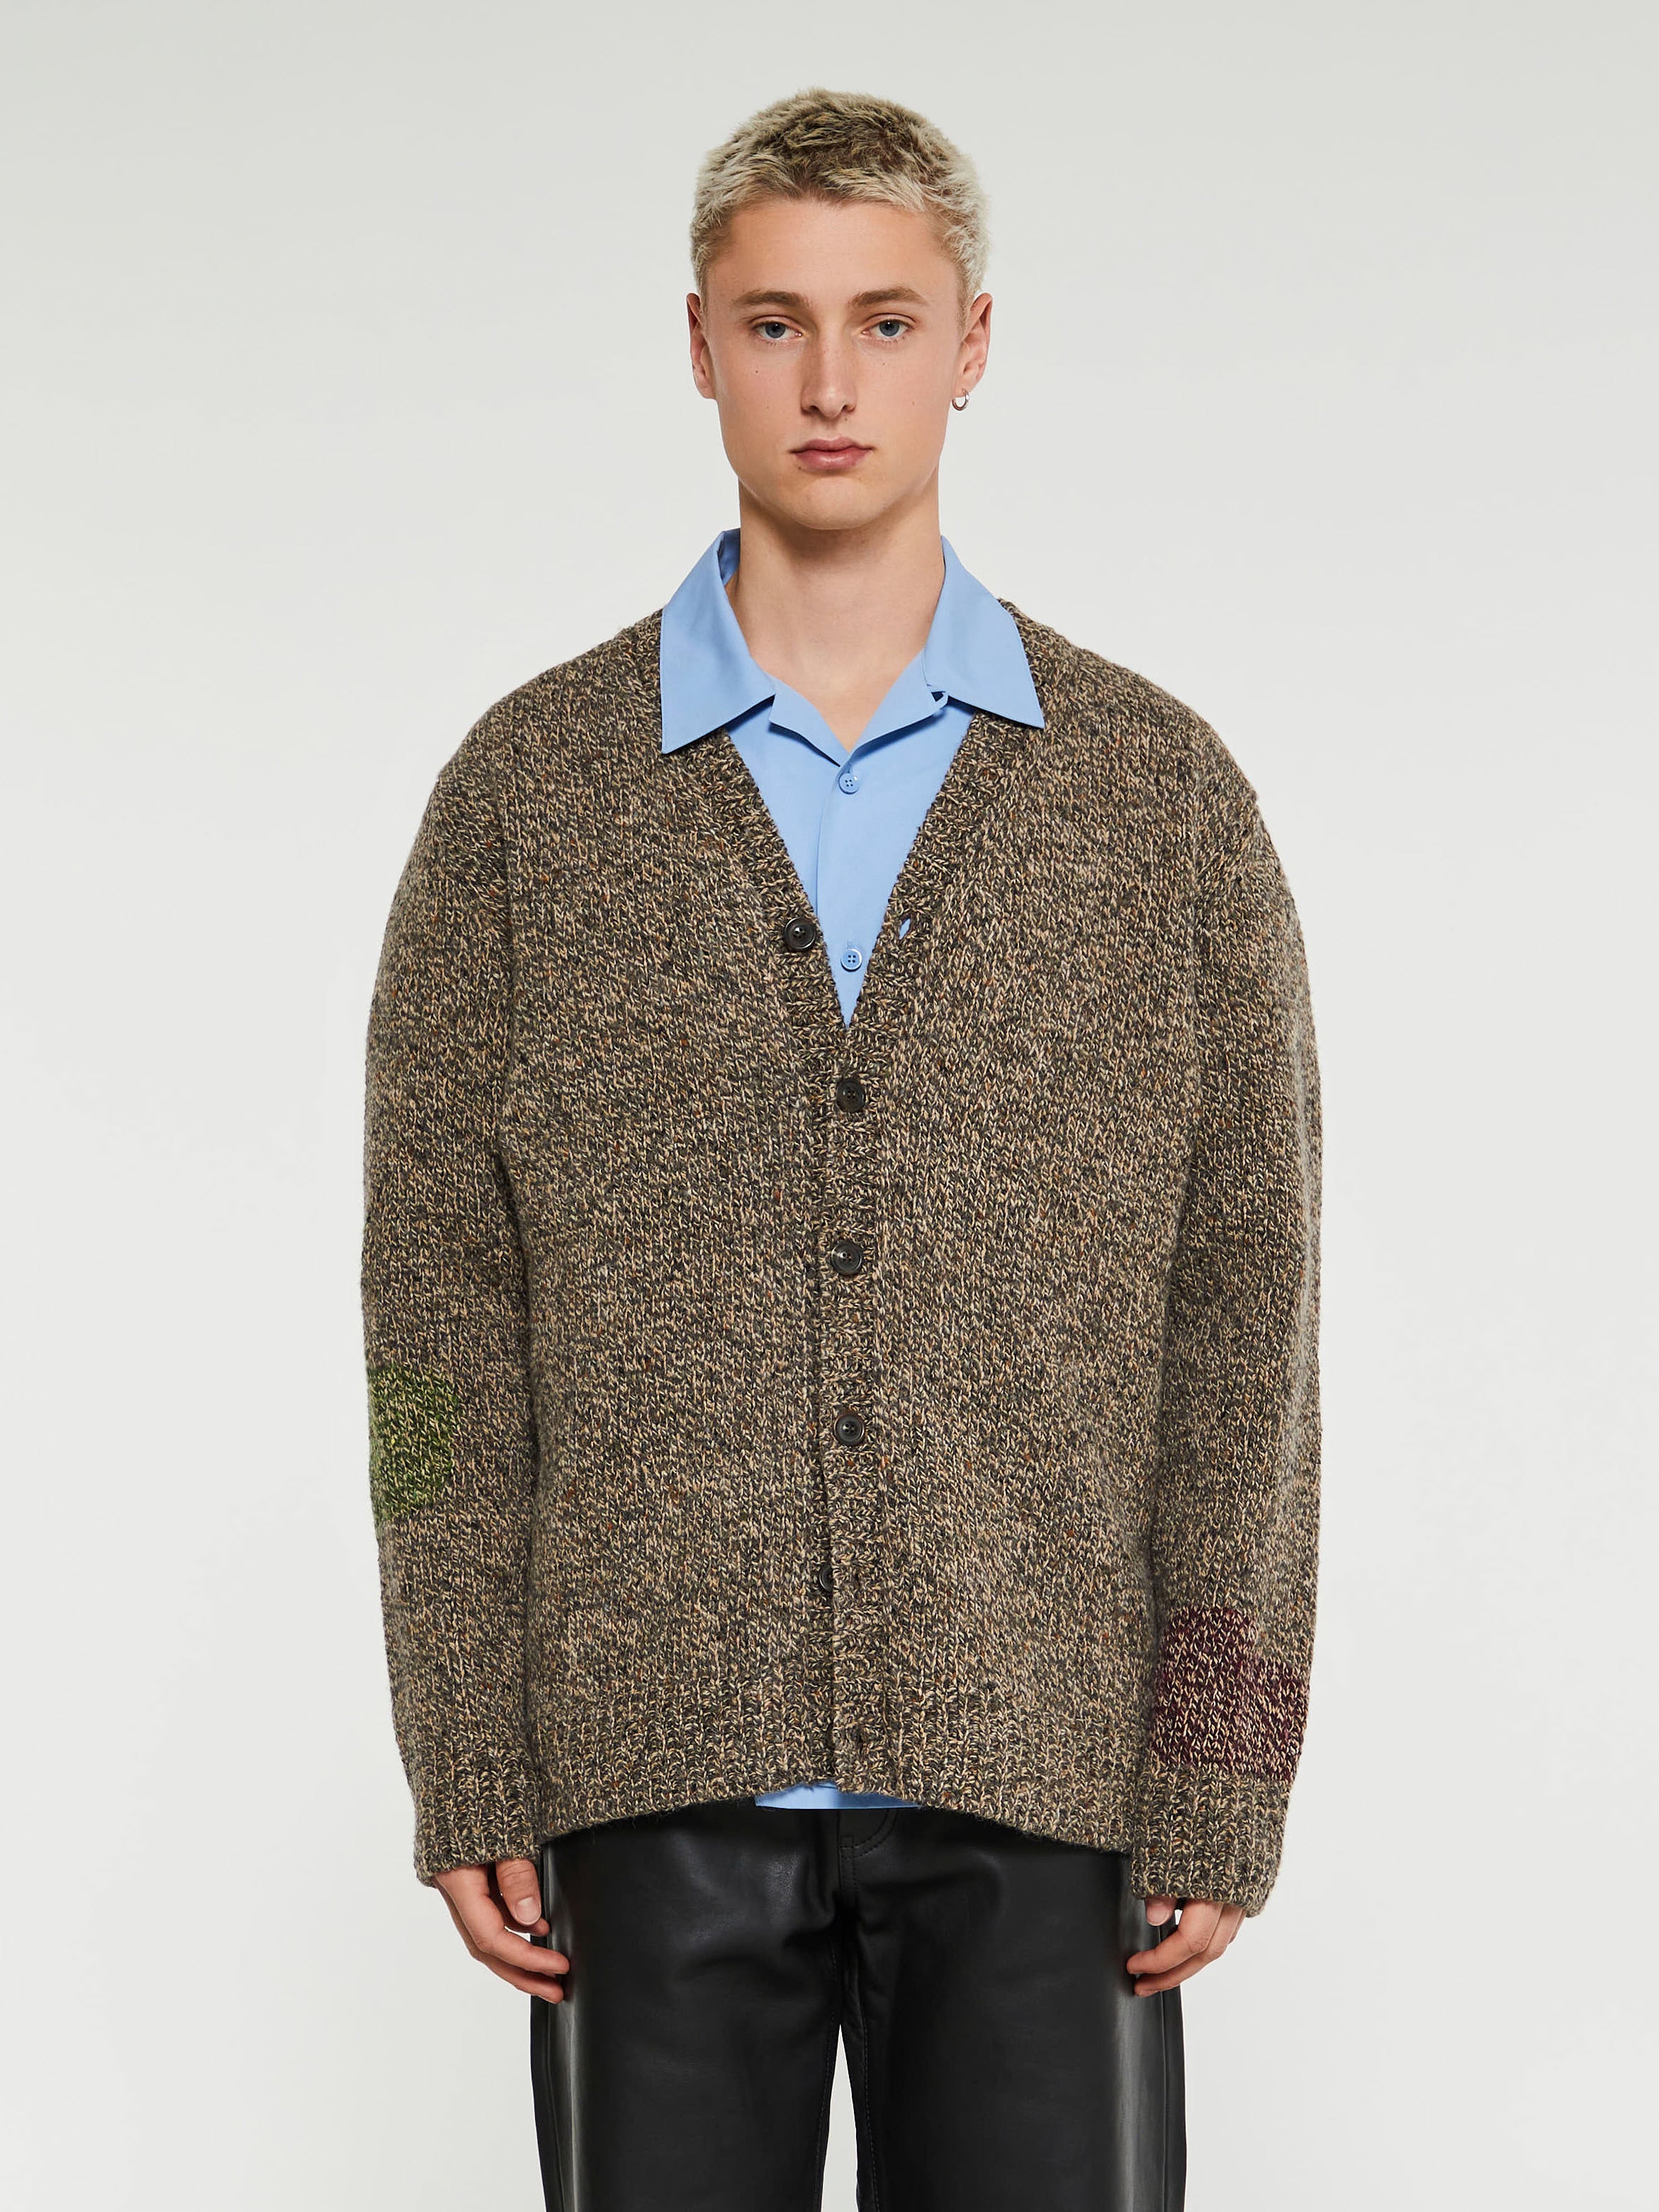 Knitwear for Men | See knitwear for men at stoy